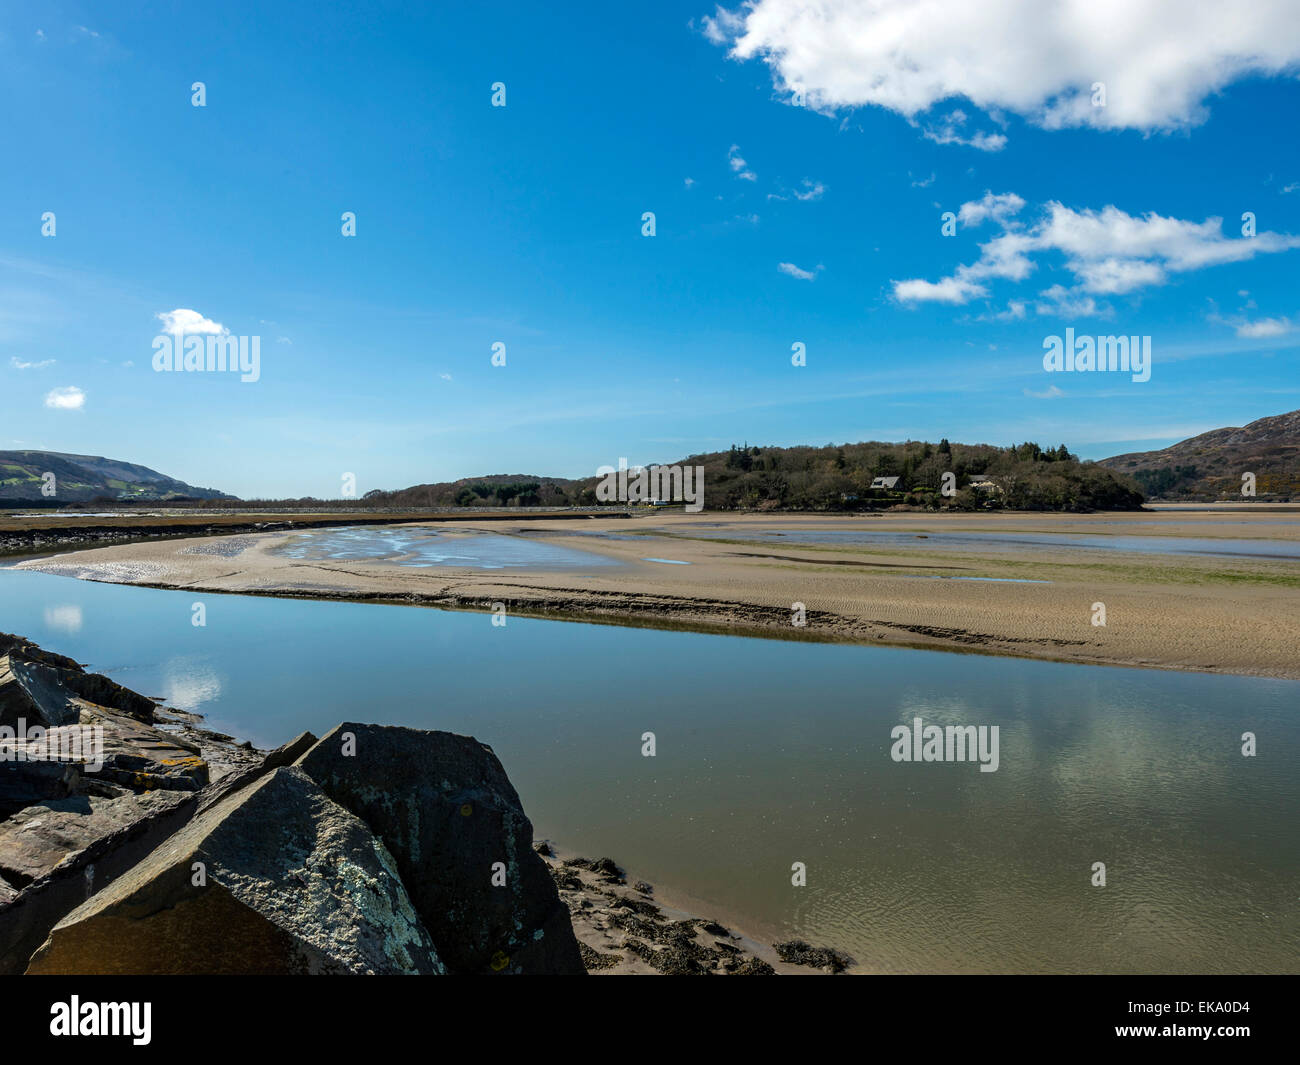 Landscape depicting Afon Mawddach and Min Y Don area on a clear spring day with blue sky and banks of white cumulus cloud Stock Photo